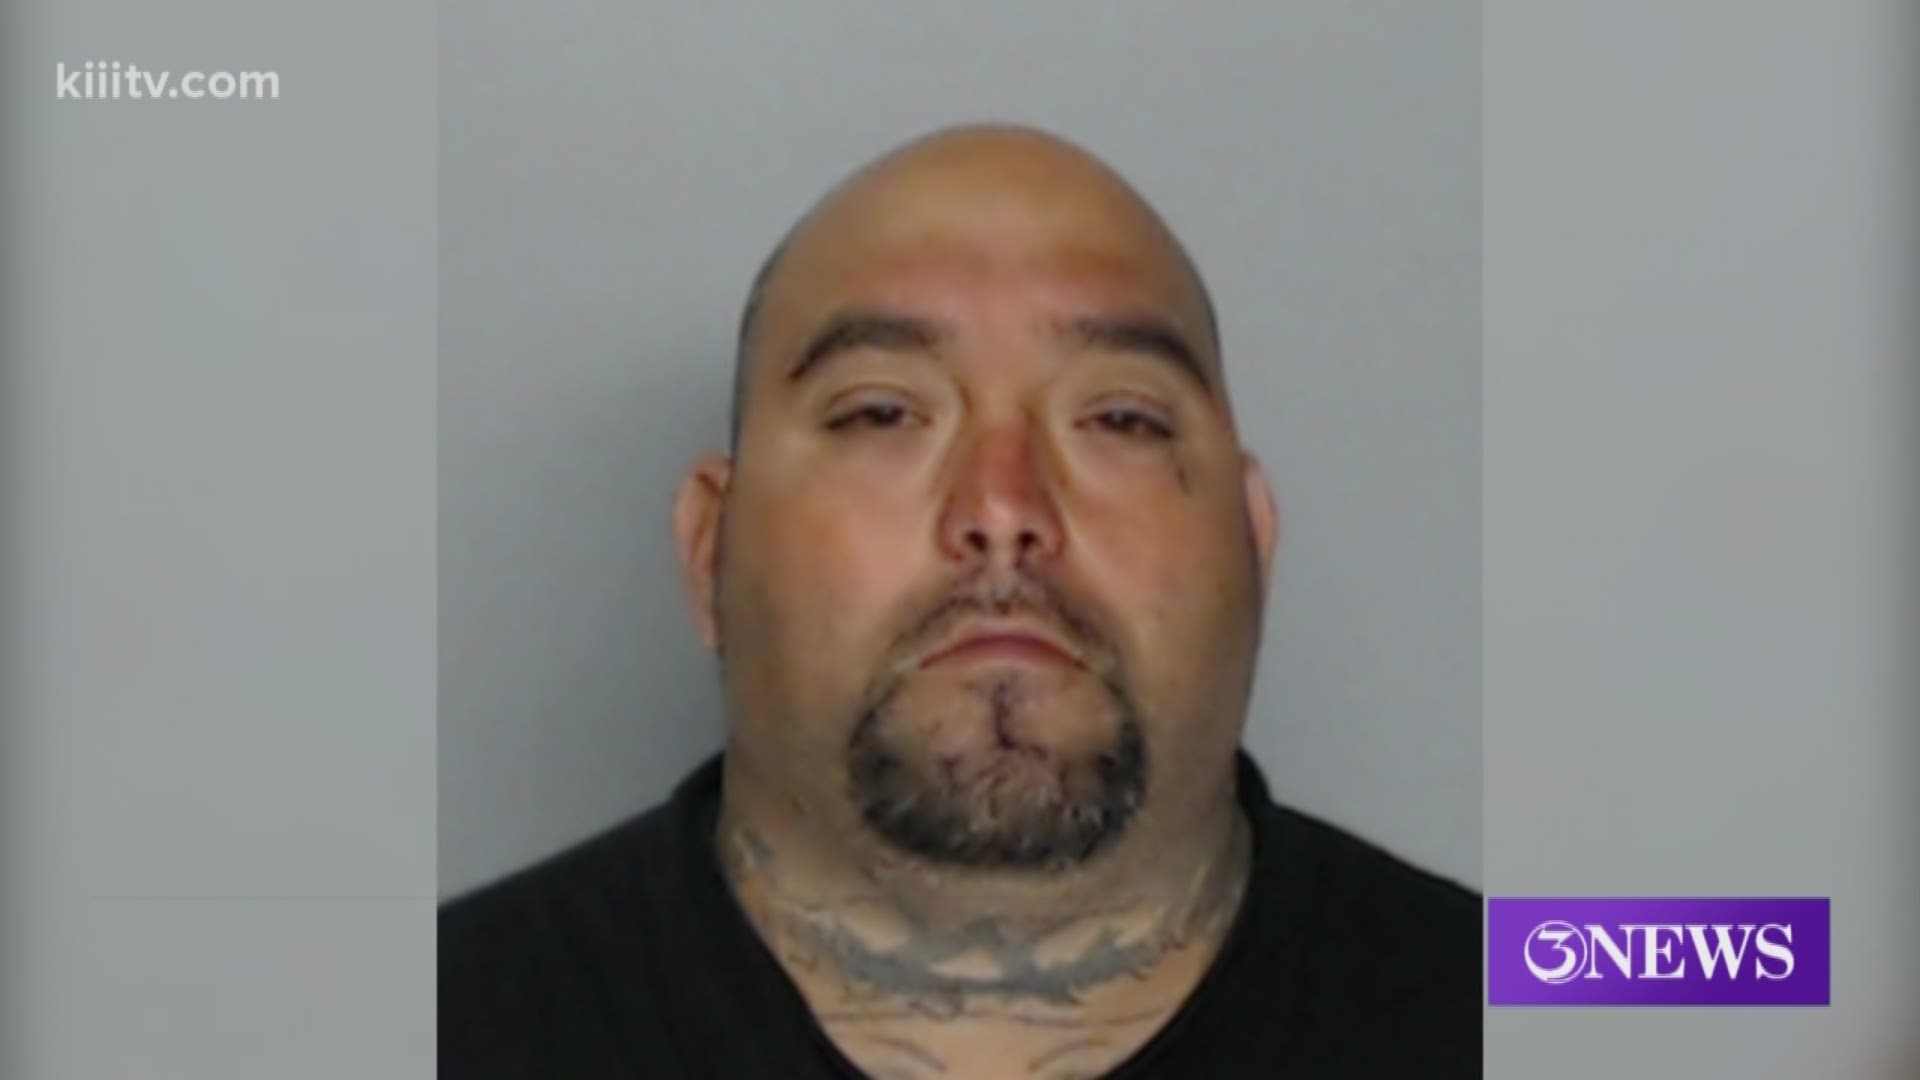 34-year- old Arnold Angel Soto, along with a juvenile were arrested and charged with aggravated assault with a deadly weapon.